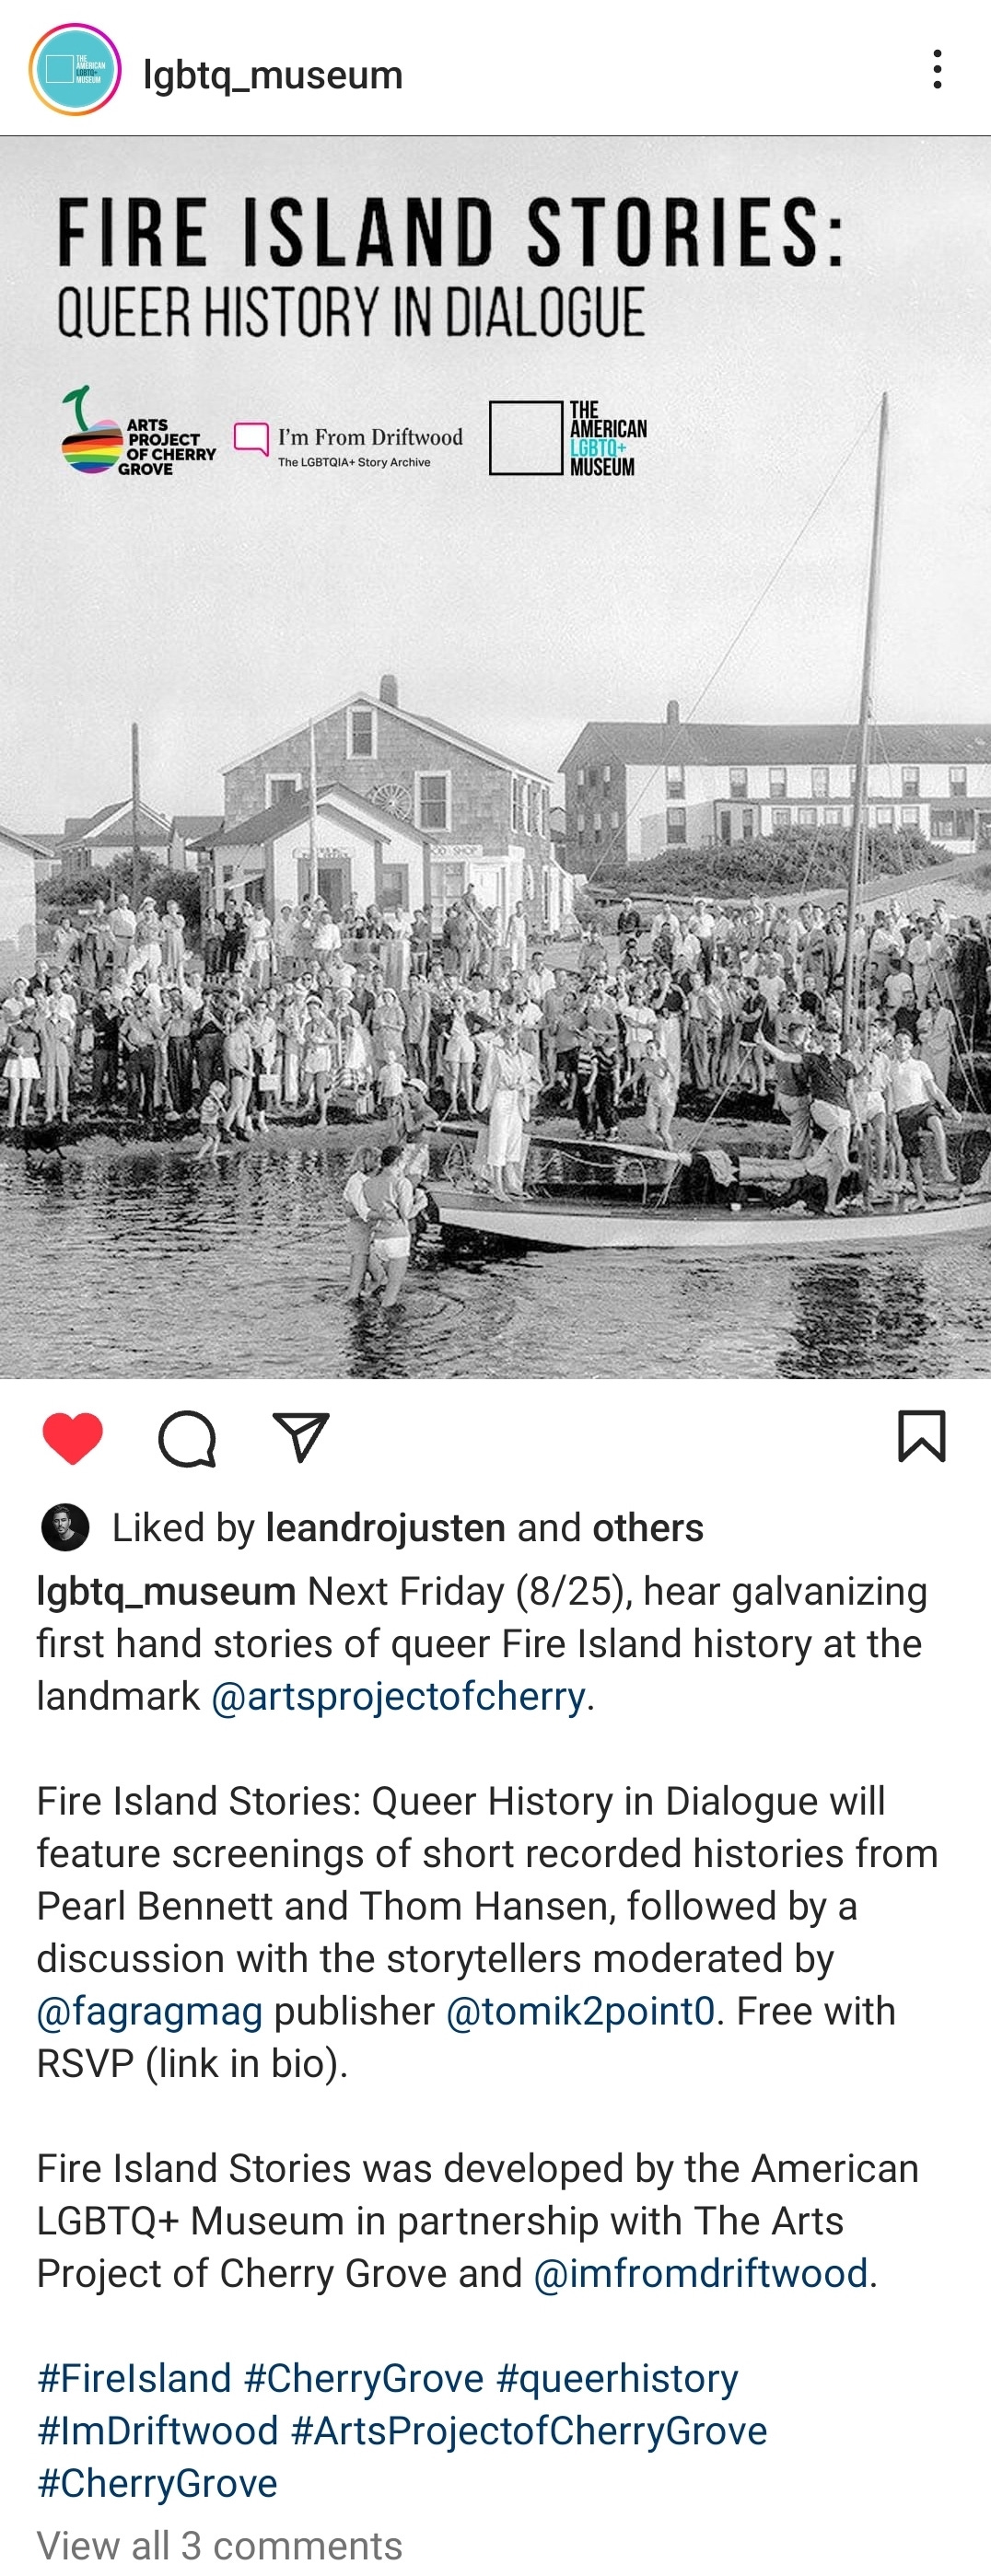 Instagram post by The American LGBTQ Museum (@lgbtq_museum). The top section features bold text saying 'FIRE ISLAND STORIES: QUEER HISTORY IN DIALOGUE', accompanied by logos of 'Arts Project of Cherry Grove', 'I'm From Driftwood: The LGBTQIA+ Story Archive', and 'The American LGBTQ+ Museum'. Below is a vintage grayscale photo showcasing a gathering of people near a dock, with wooden houses in the background. The caption reads: 'Next Friday (8/25), hear stories of queer Fire Island history at the landmark @artsprojectofcherry. Fire Island Stories: Queer History in Dialogue will have short recorded histories from Pearl Bennett and Thom Hansen, with a discussion moderated by @fagragmag publisher @tomik2point0. Event is free with RSVP. Developed in partnership with The Arts Project of Cherry Grove and @imfromdriftwood.' The post includes various hashtags related to Fire Island and queer history and is liked by several users including @leandrojusten.